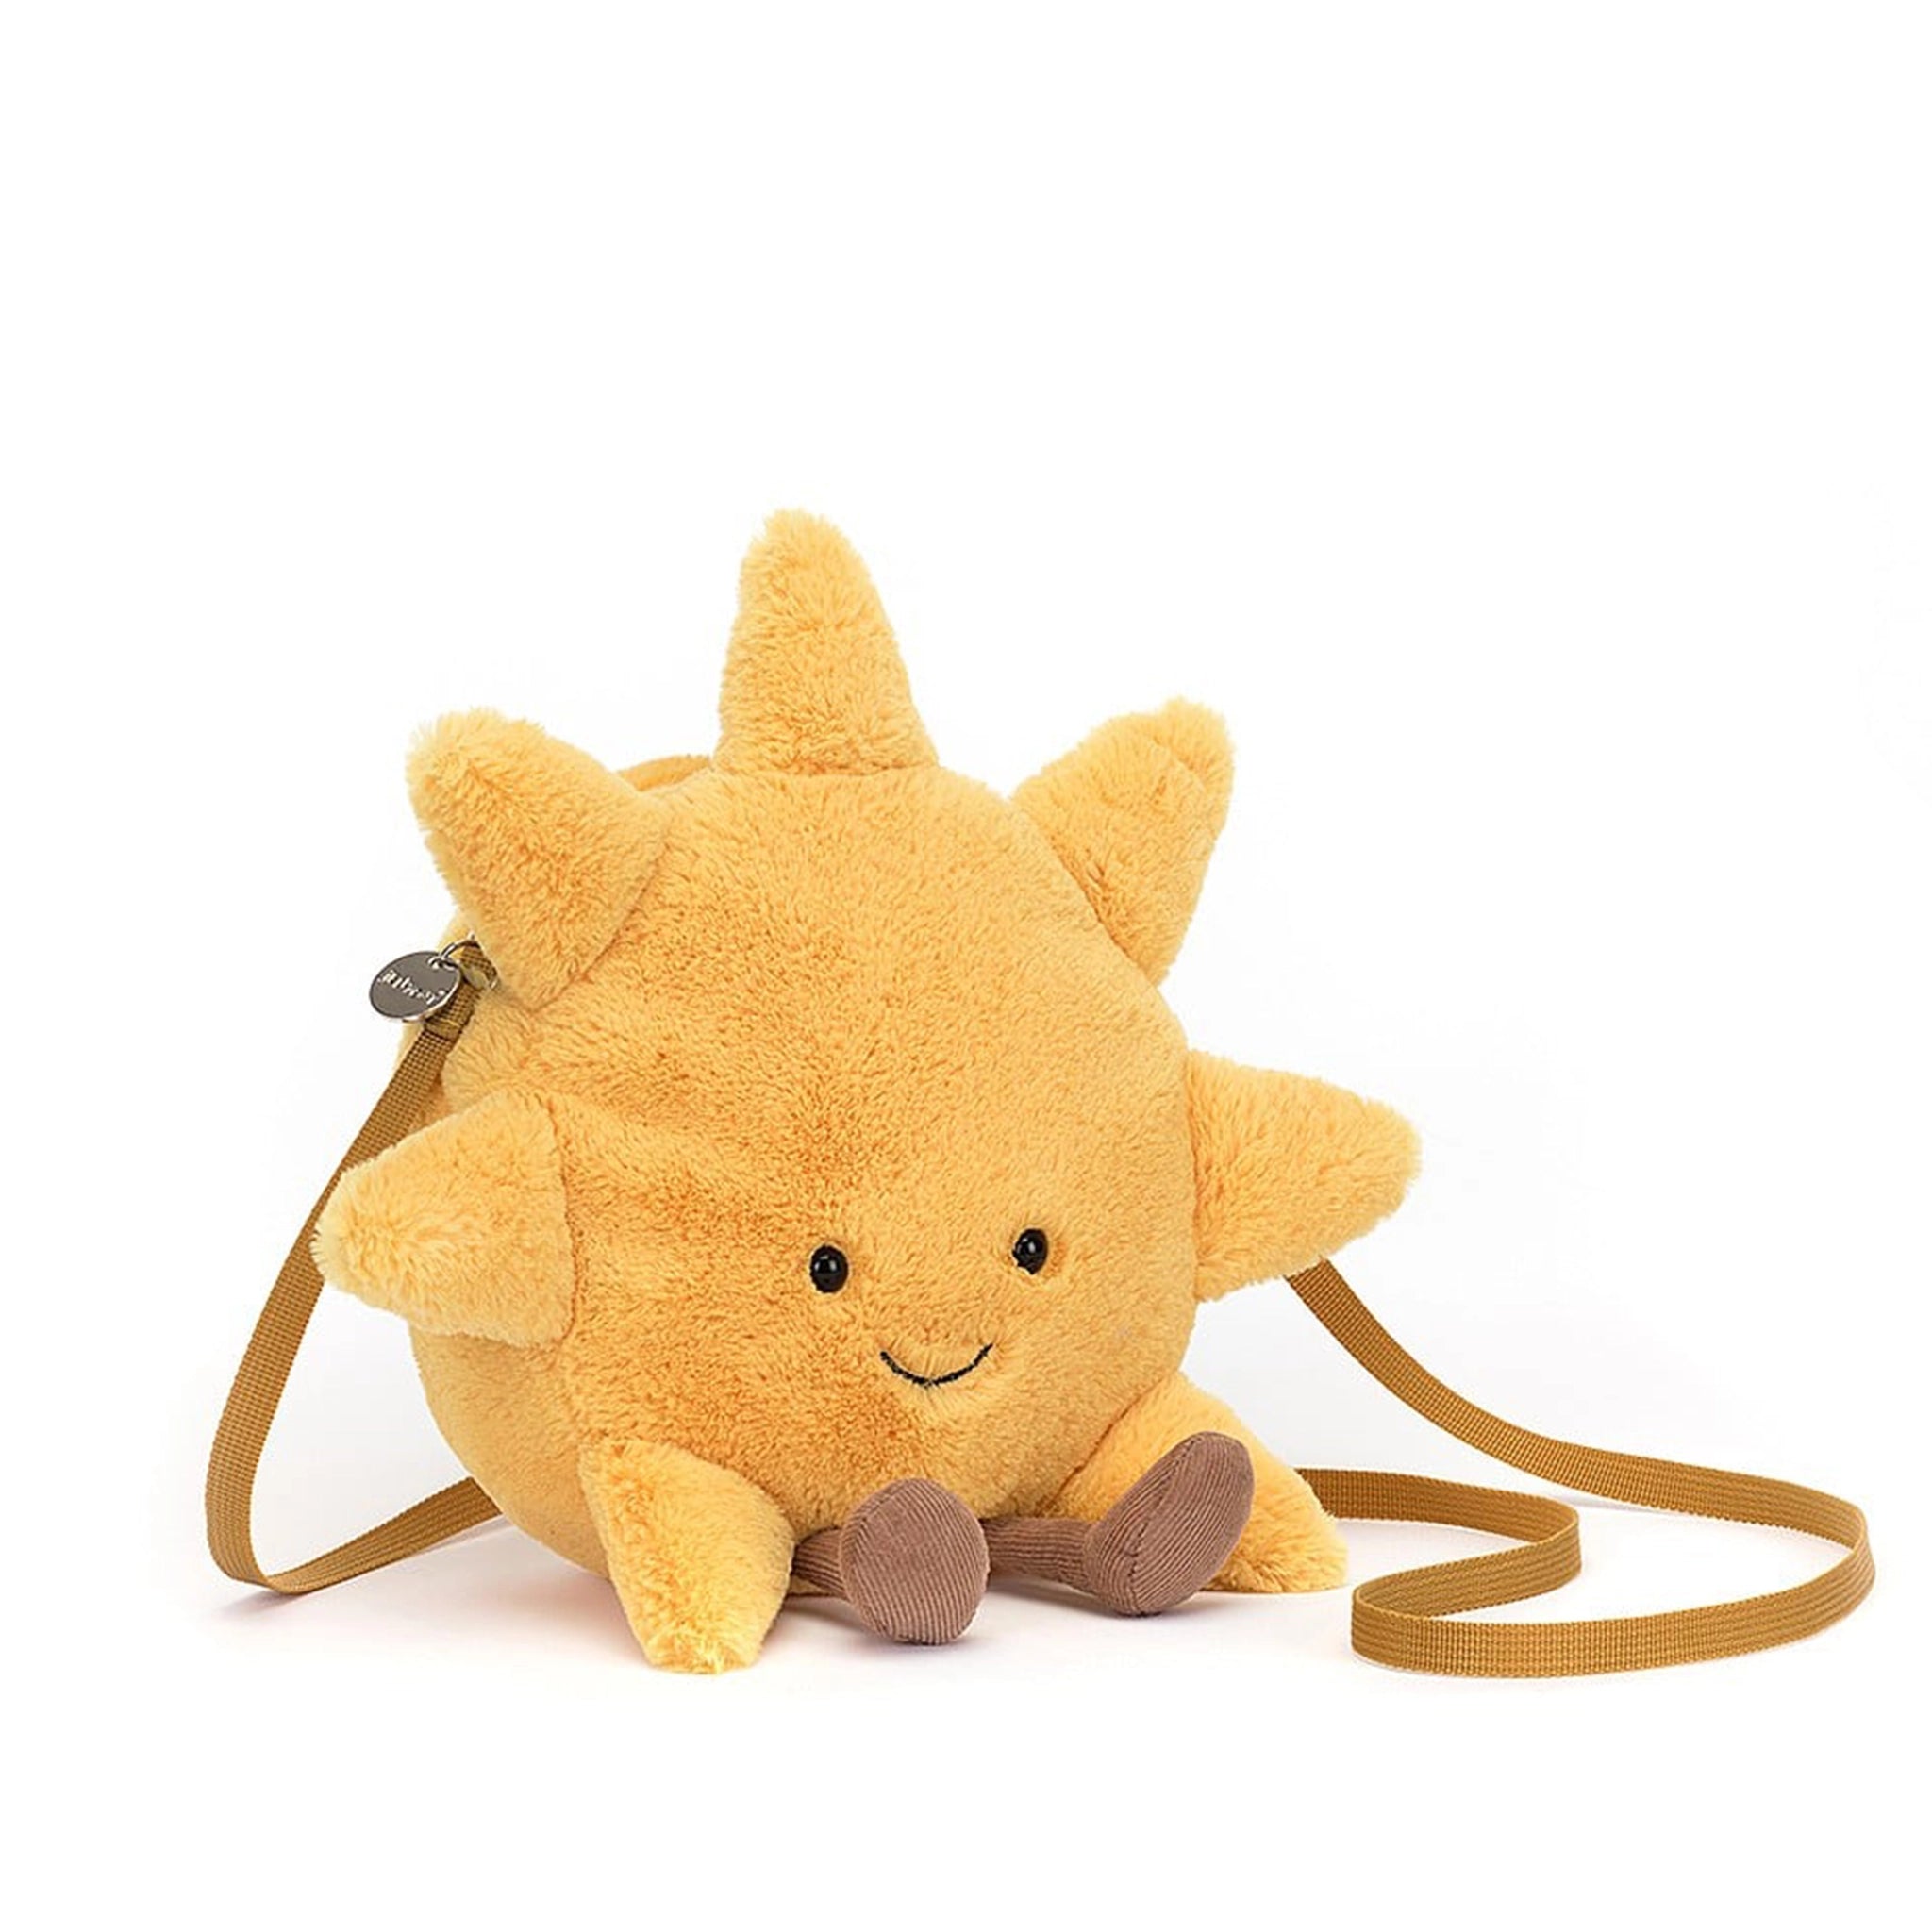 On a white background is fuzzy yellow sun bag with a brown strap and a zipper opening at the top.